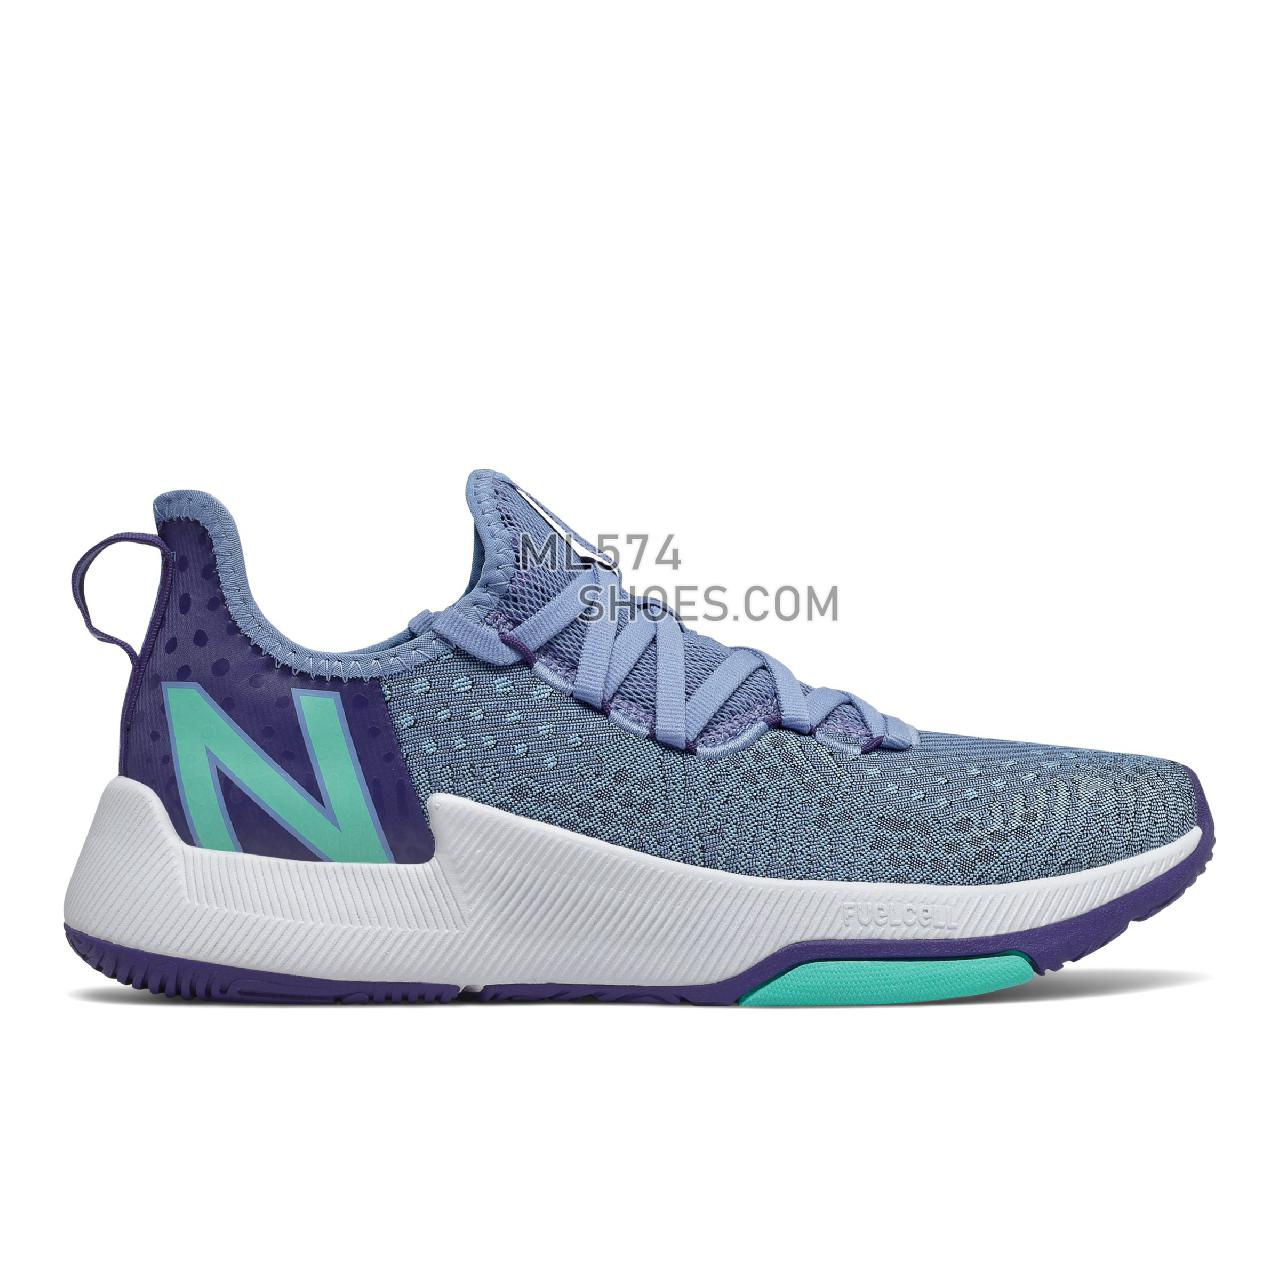 New Balance FuelCell 100 - Women's Classic Sneakers - Stellar Blue with Captain Blue and Summer Jade - WXM100LB